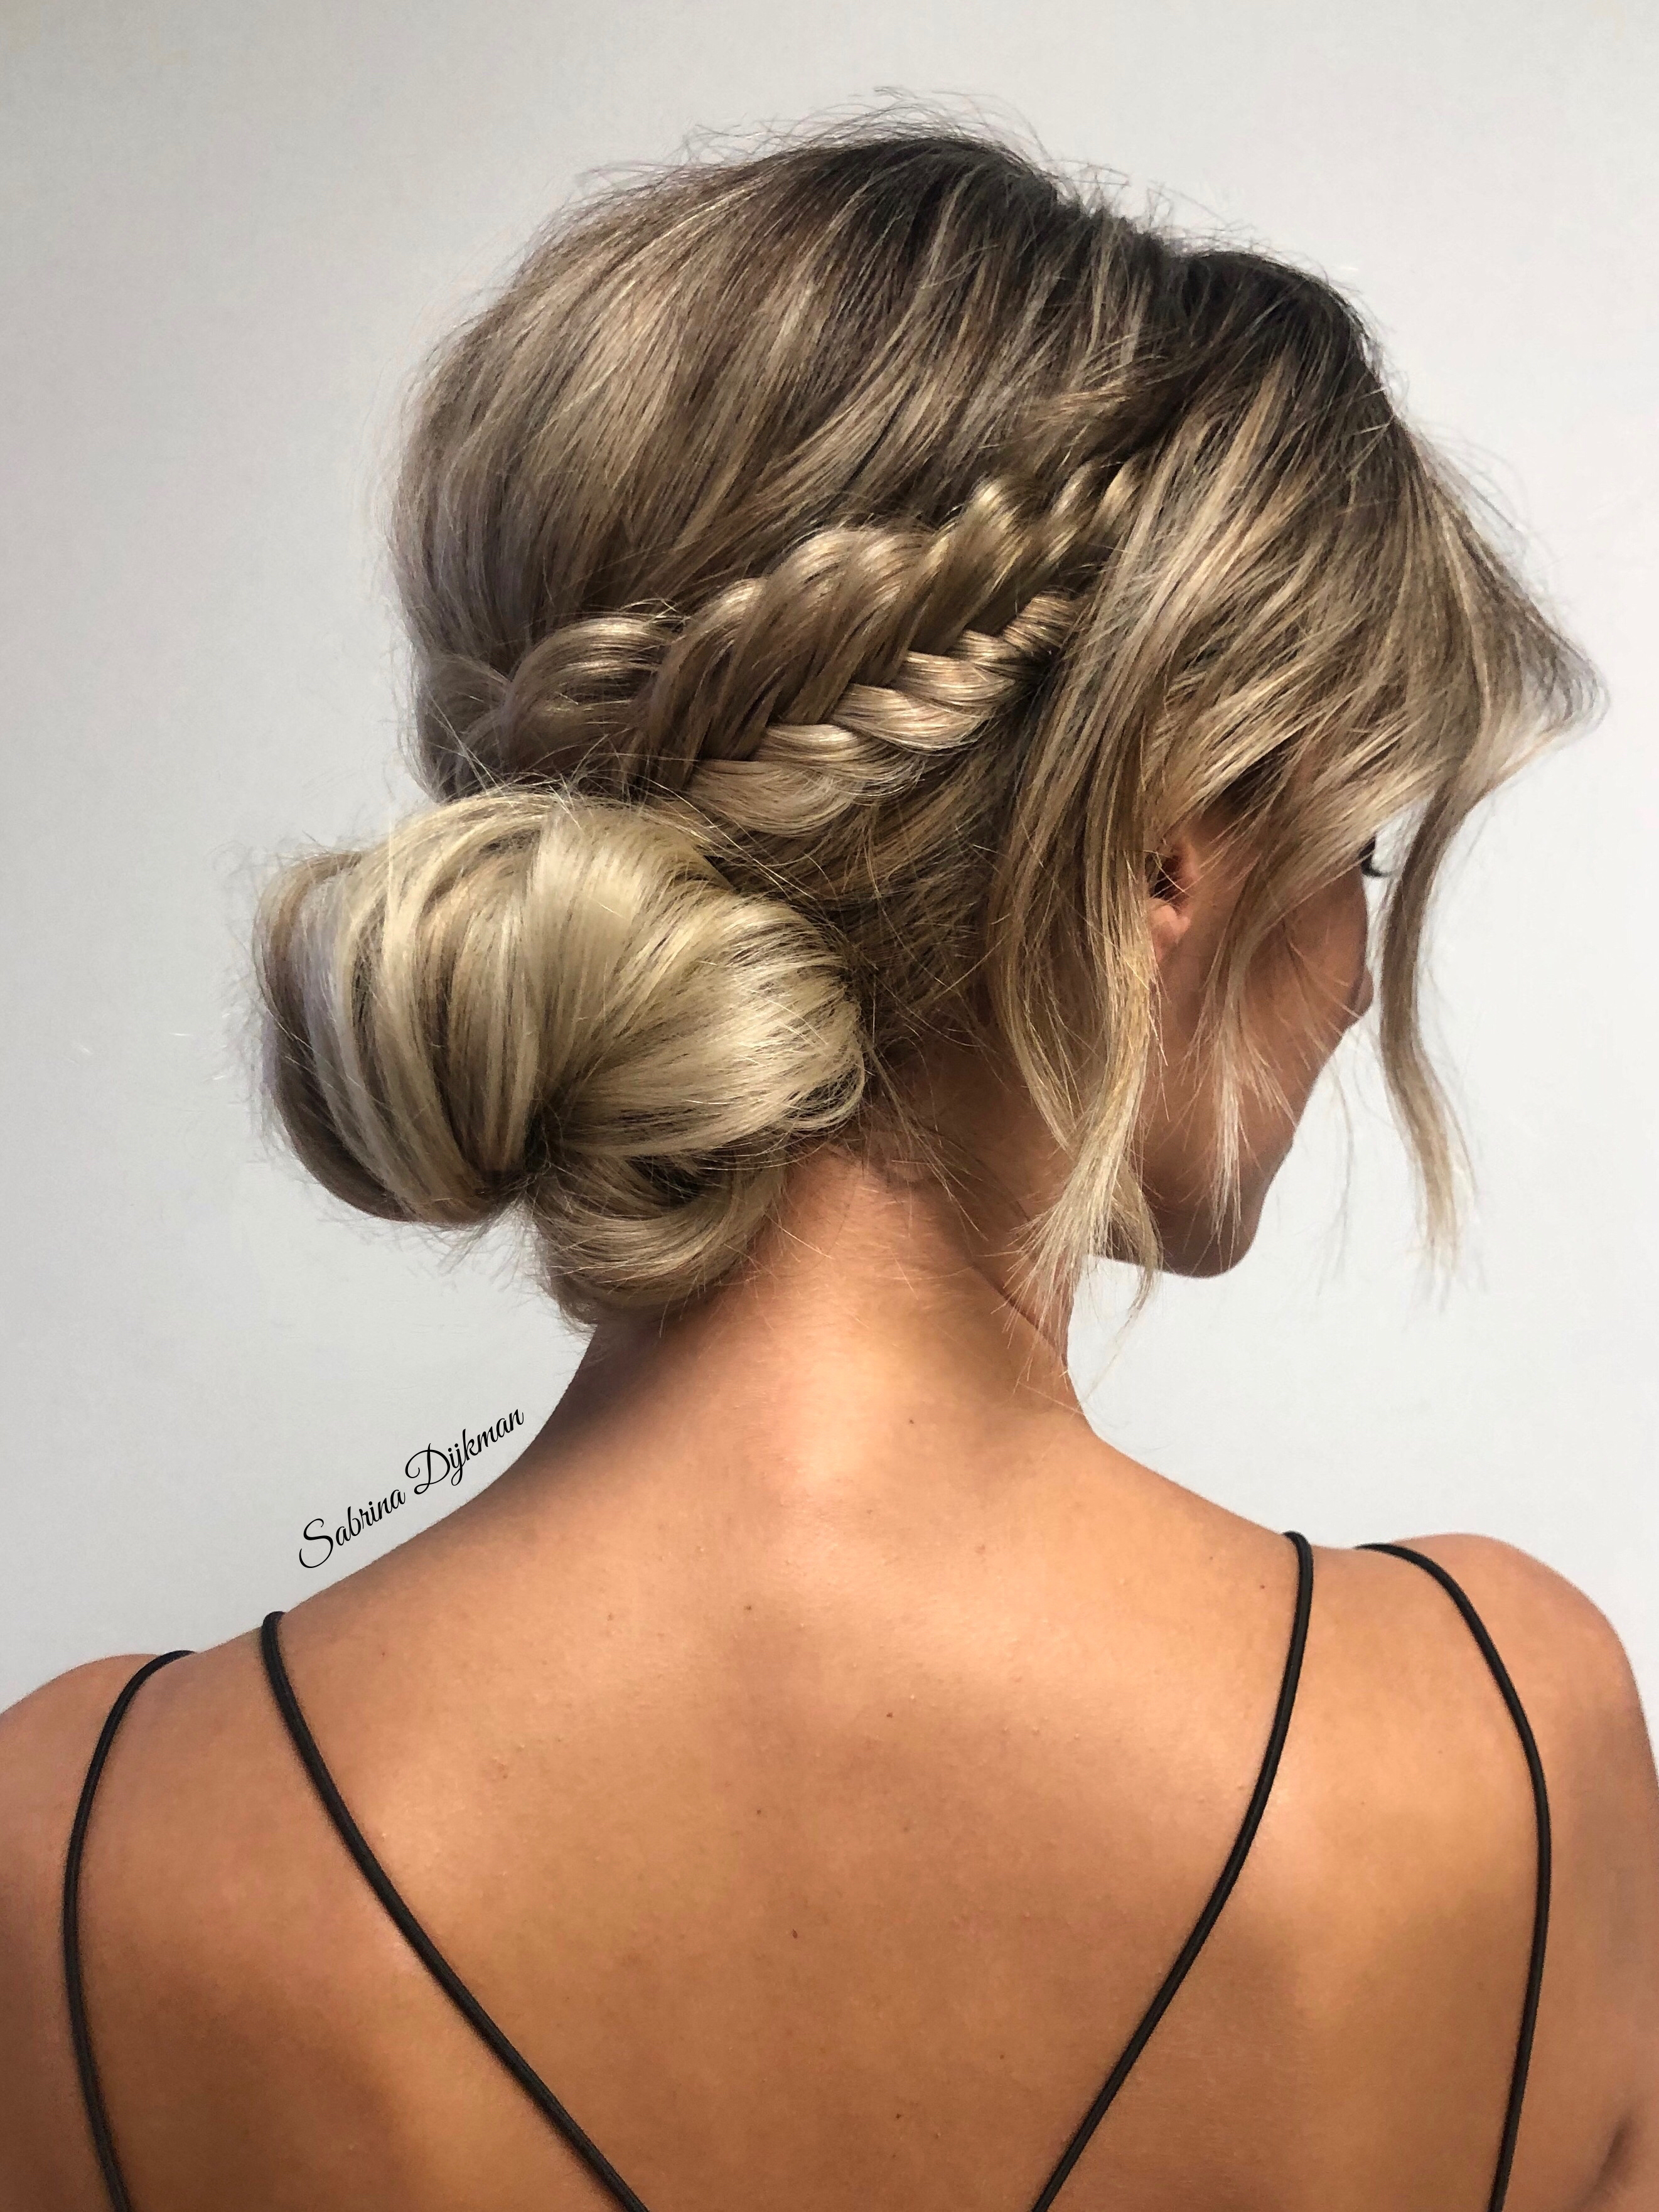 Hairstyle with Clip-In Fishtail Braid